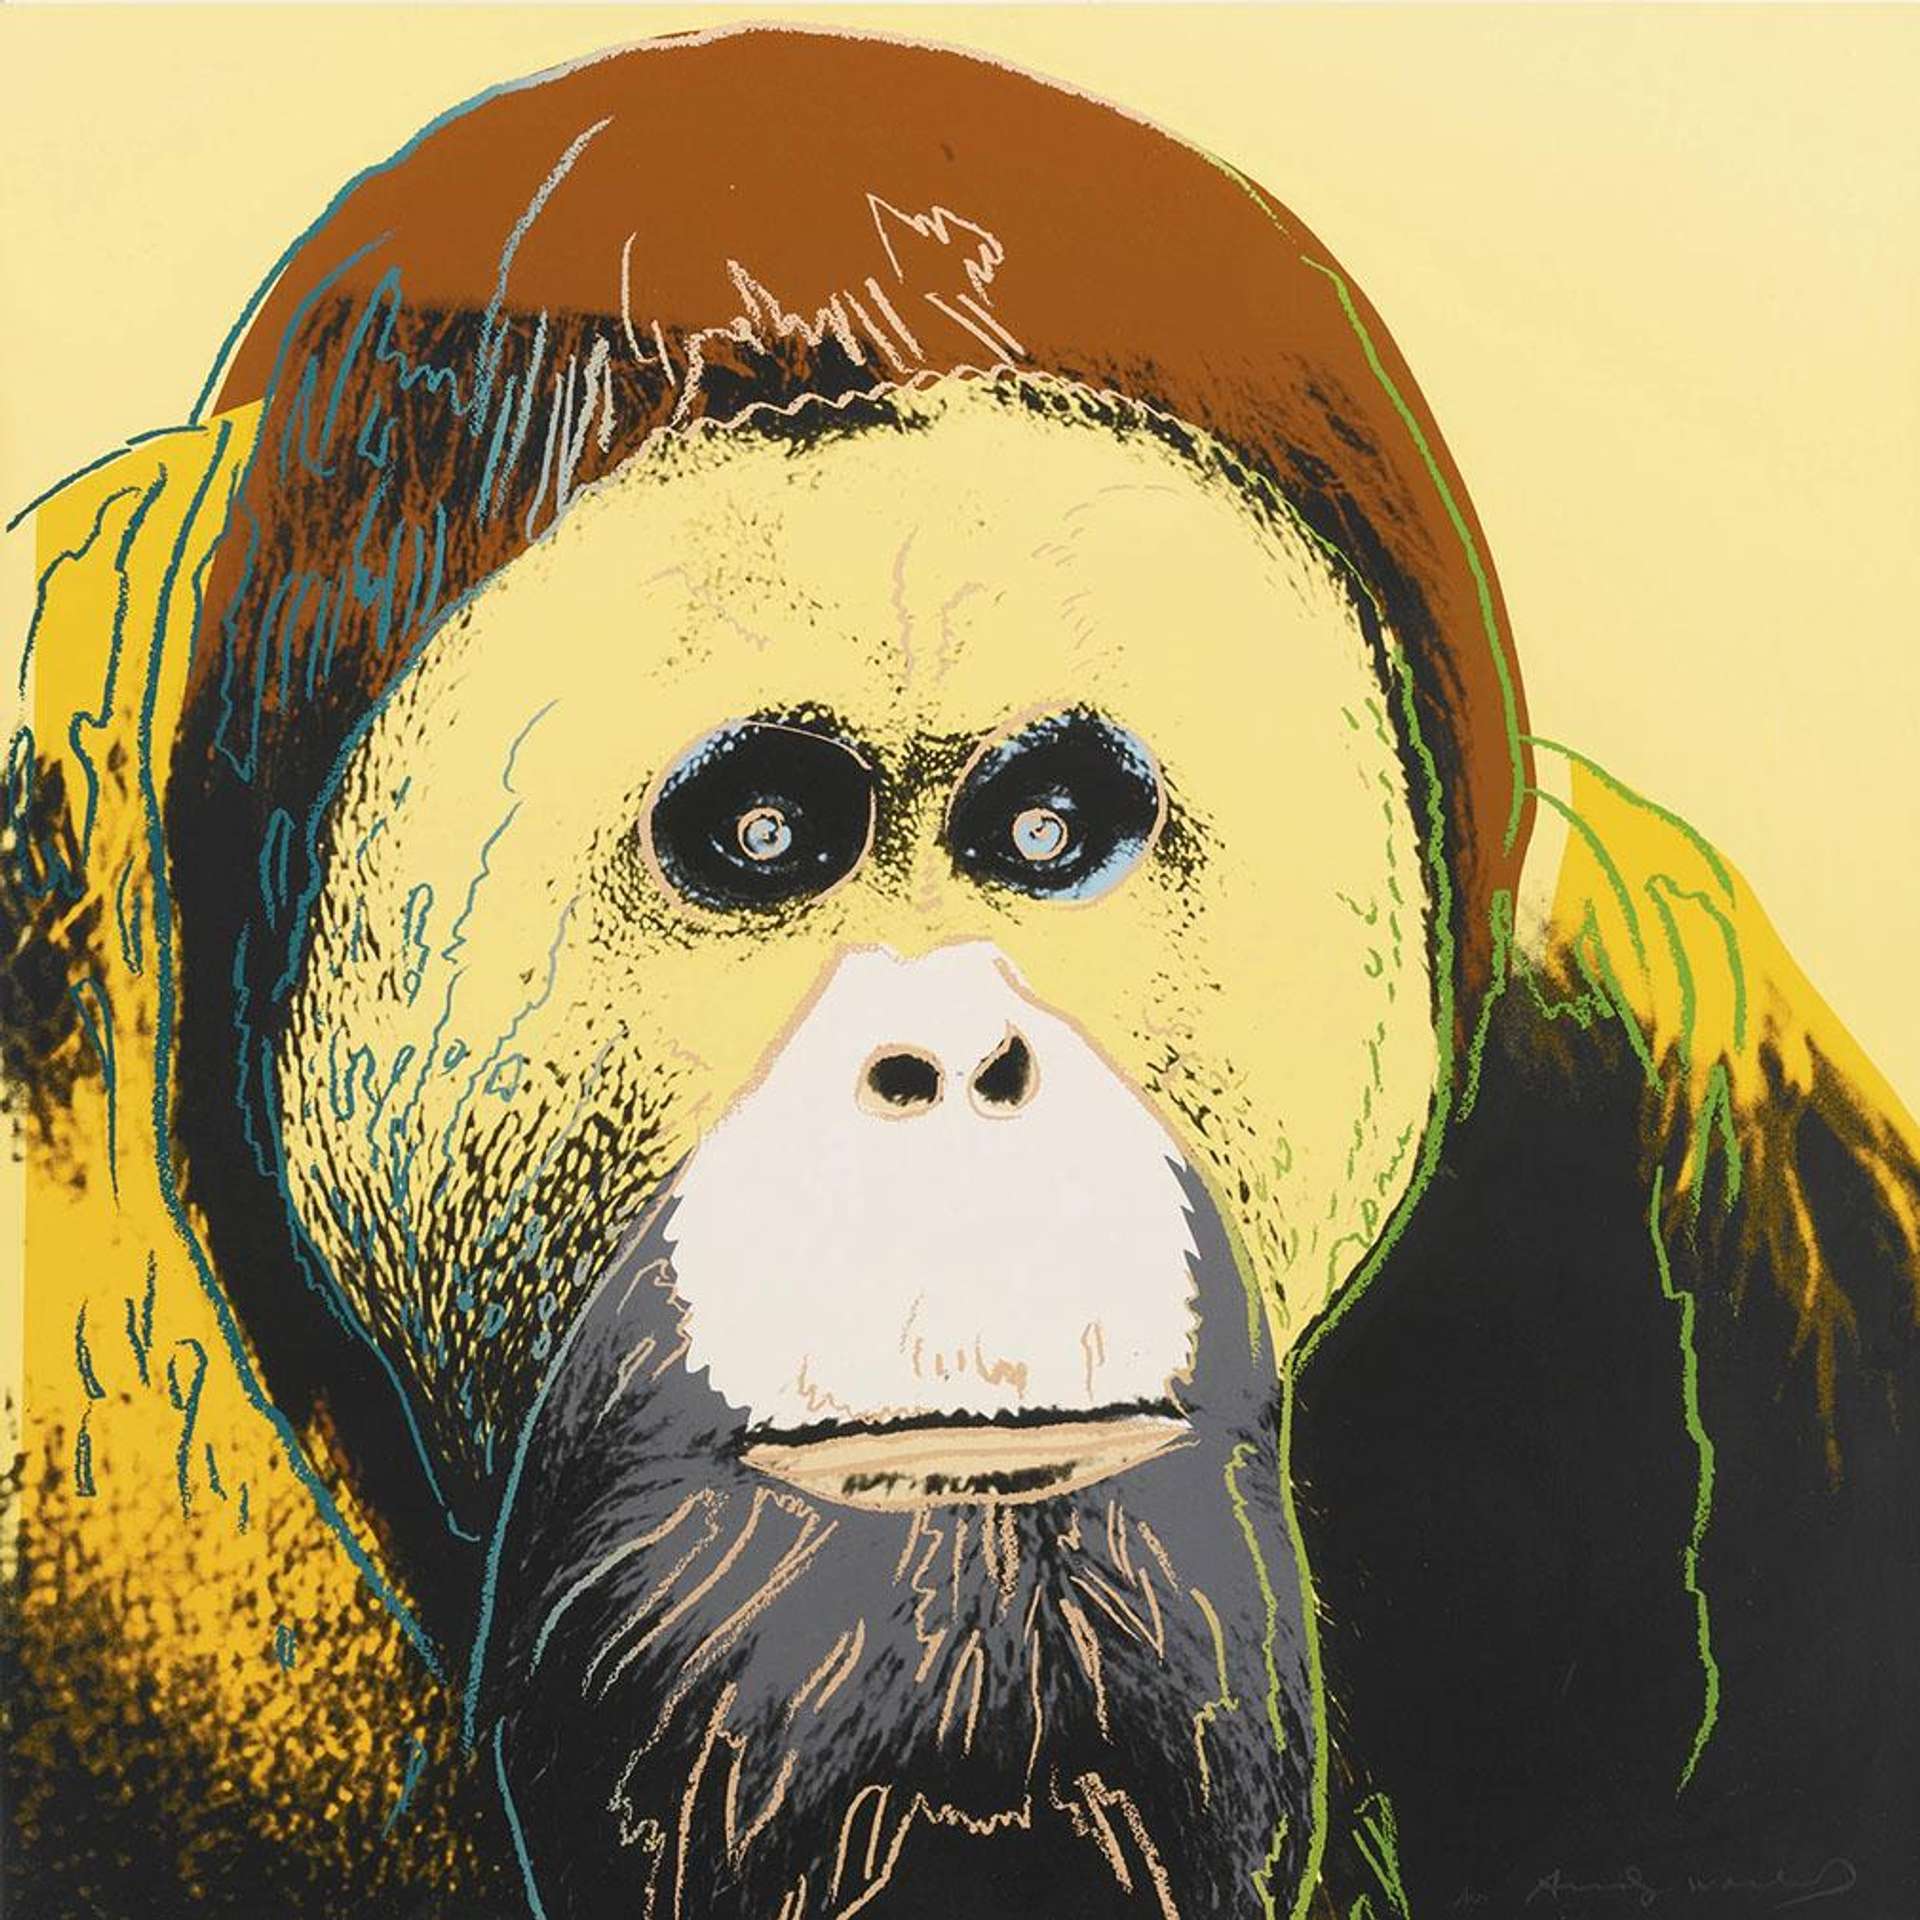 Pale yellow background featuring a sketch of an orangutan in the style of Pop Art